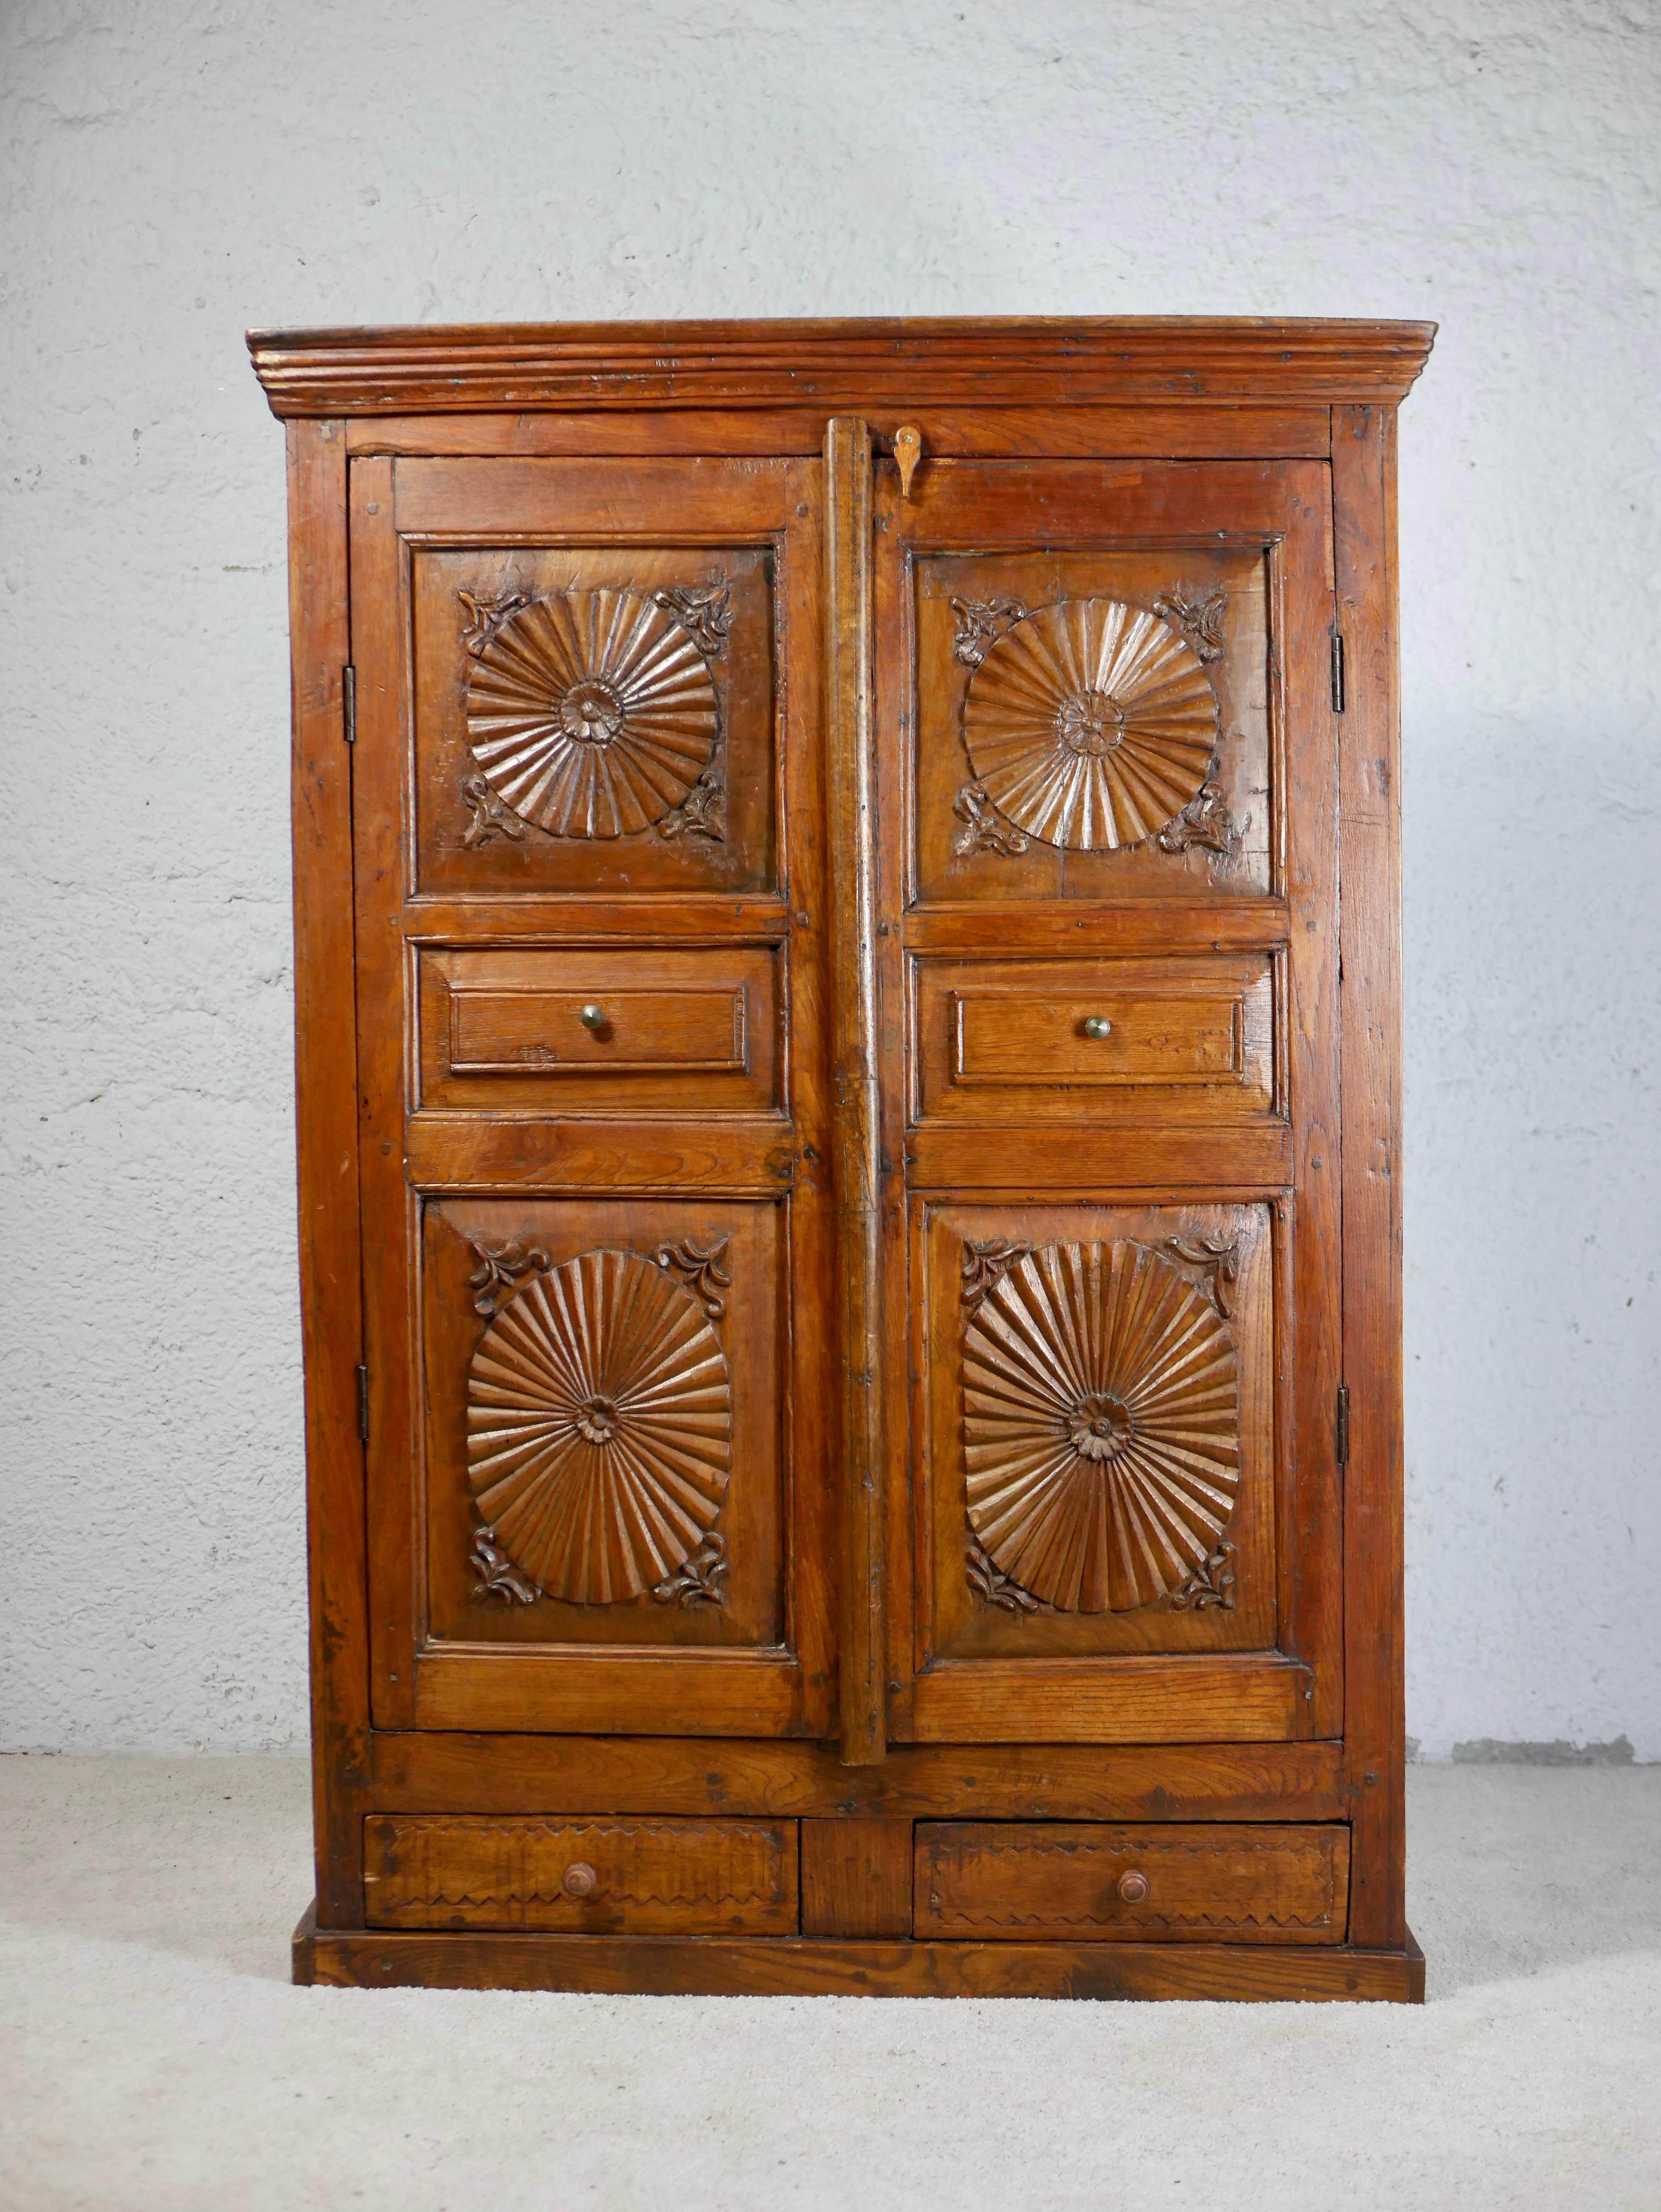 Beautiful carved cabinet in wood, made in Indonesia in the second half of the 20th century.
Country cabinet, anonymous work.
Nice details and carvings.
Overall good condition, traces of time and use.
Absolutely charming and practical